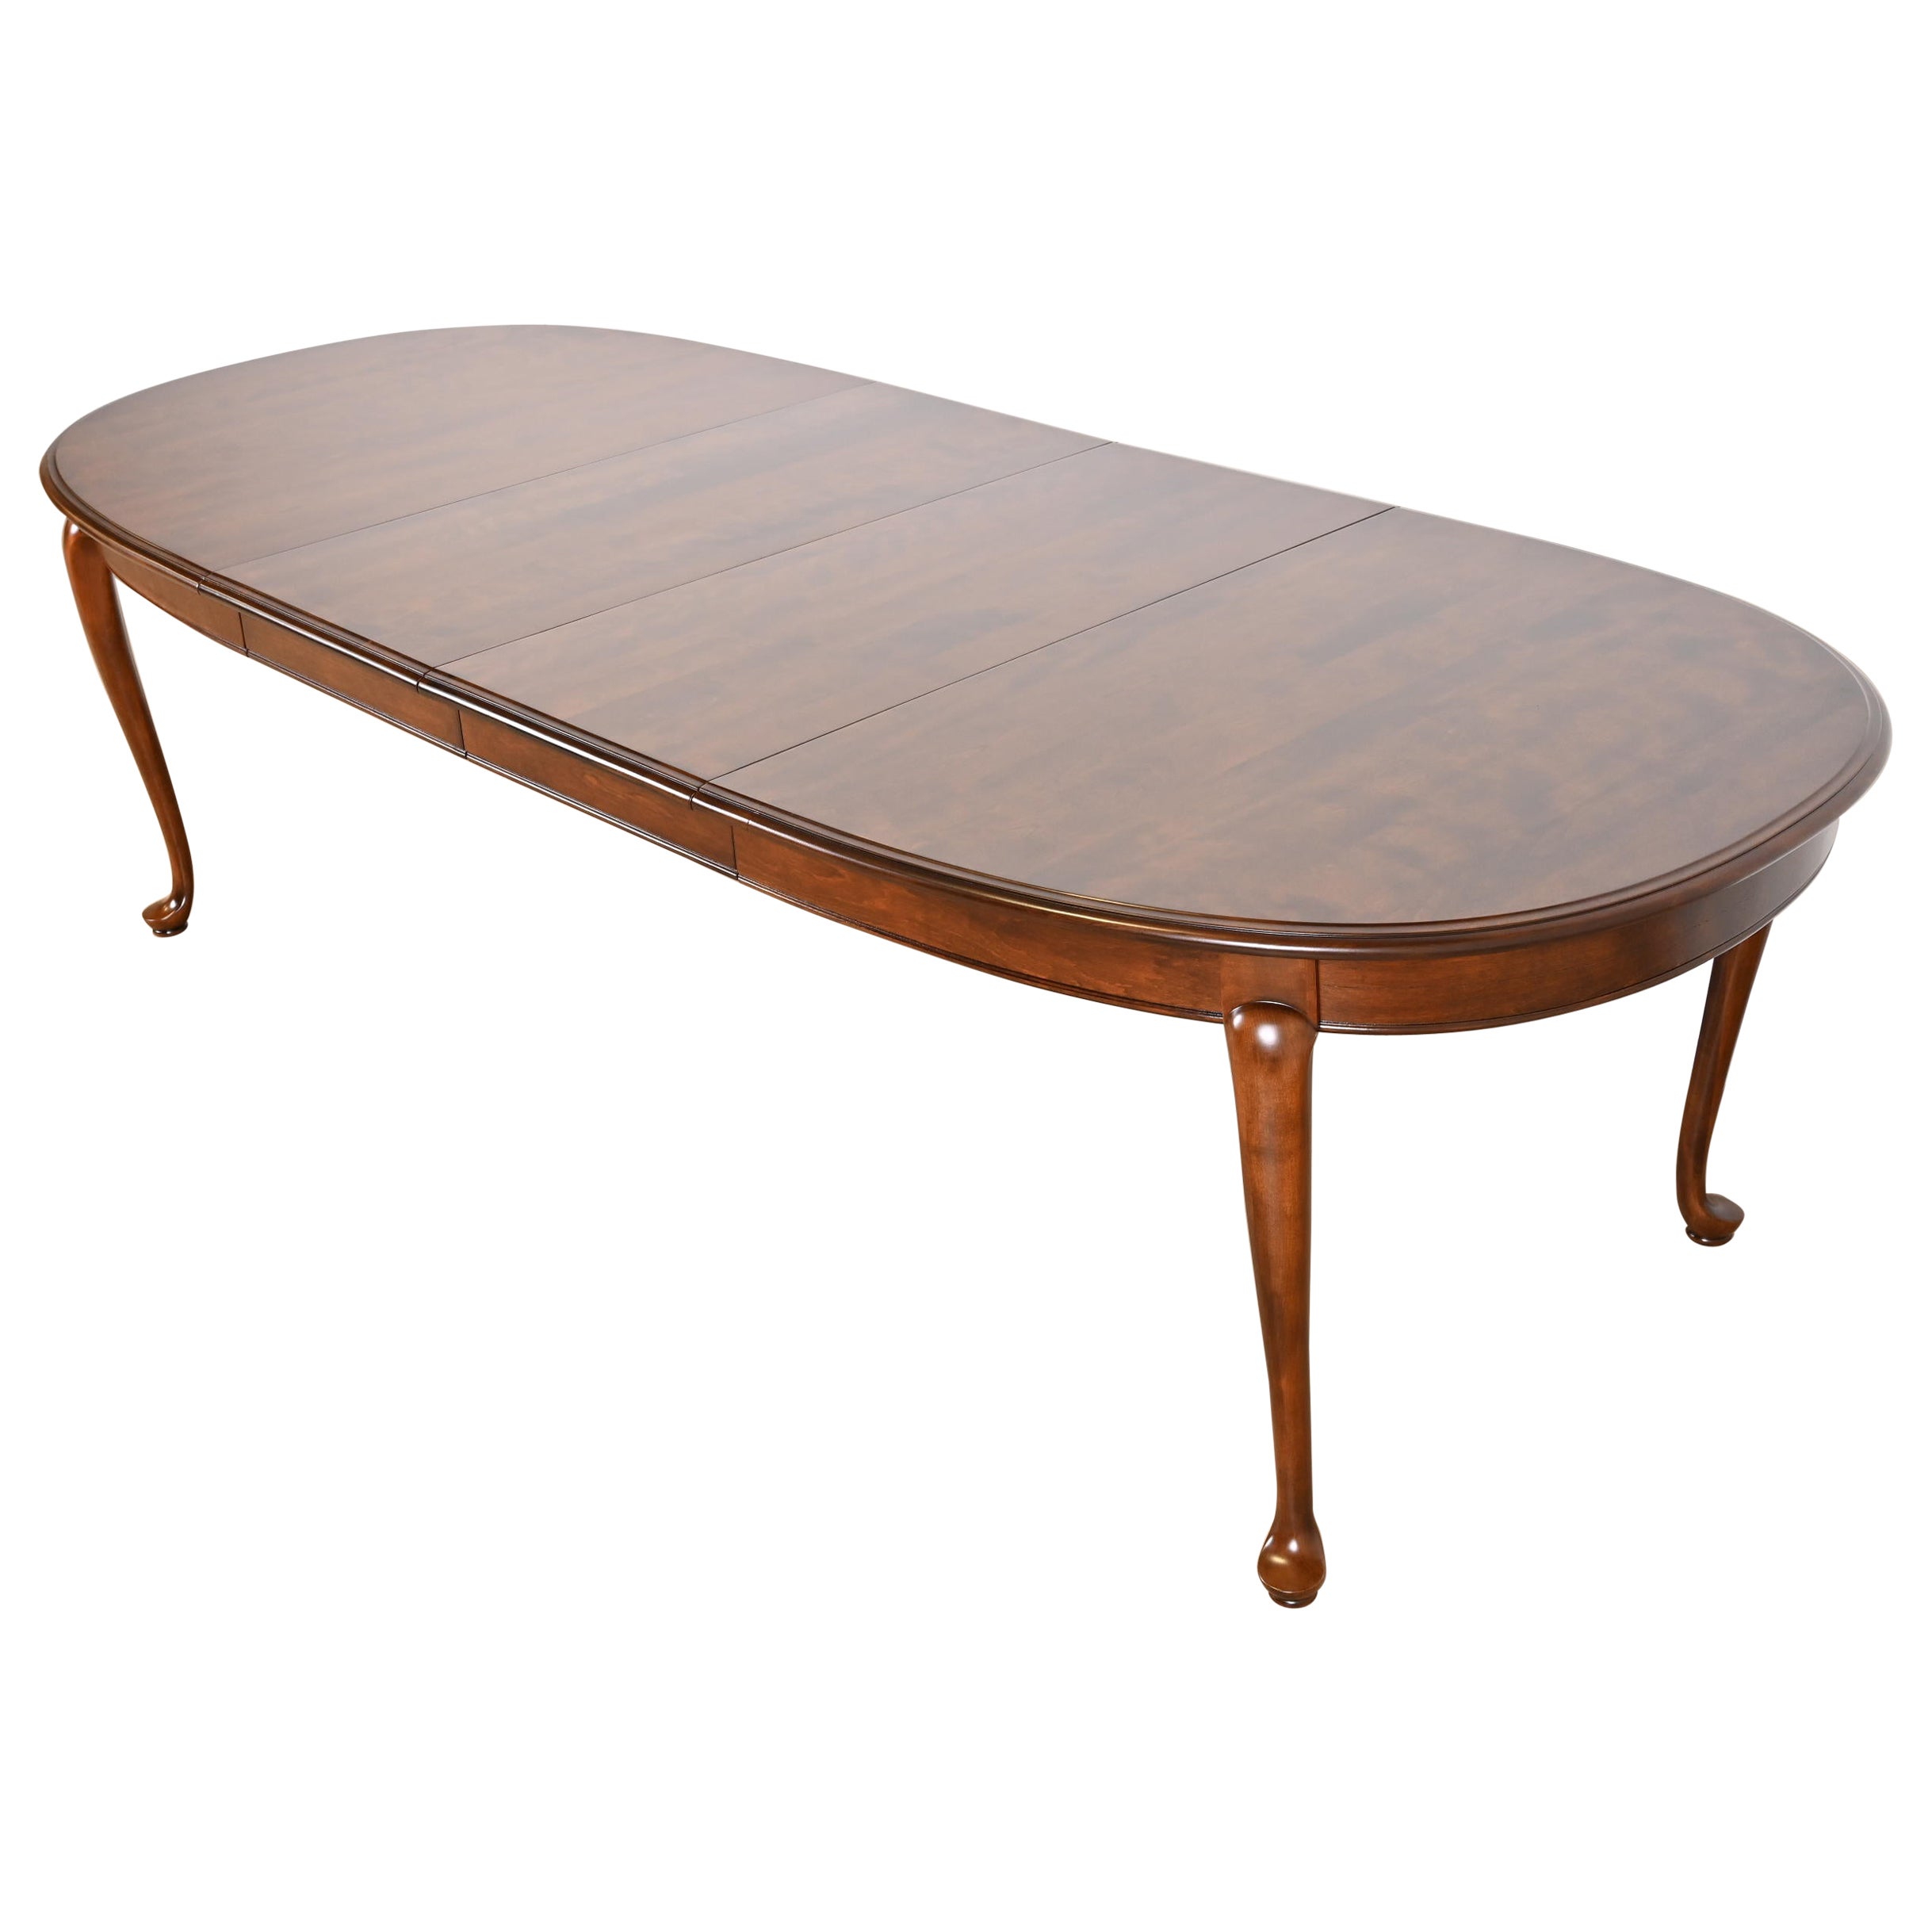 Queen Anne Solid Cherry Wood Extension Dining Table, Newly Refinished For Sale